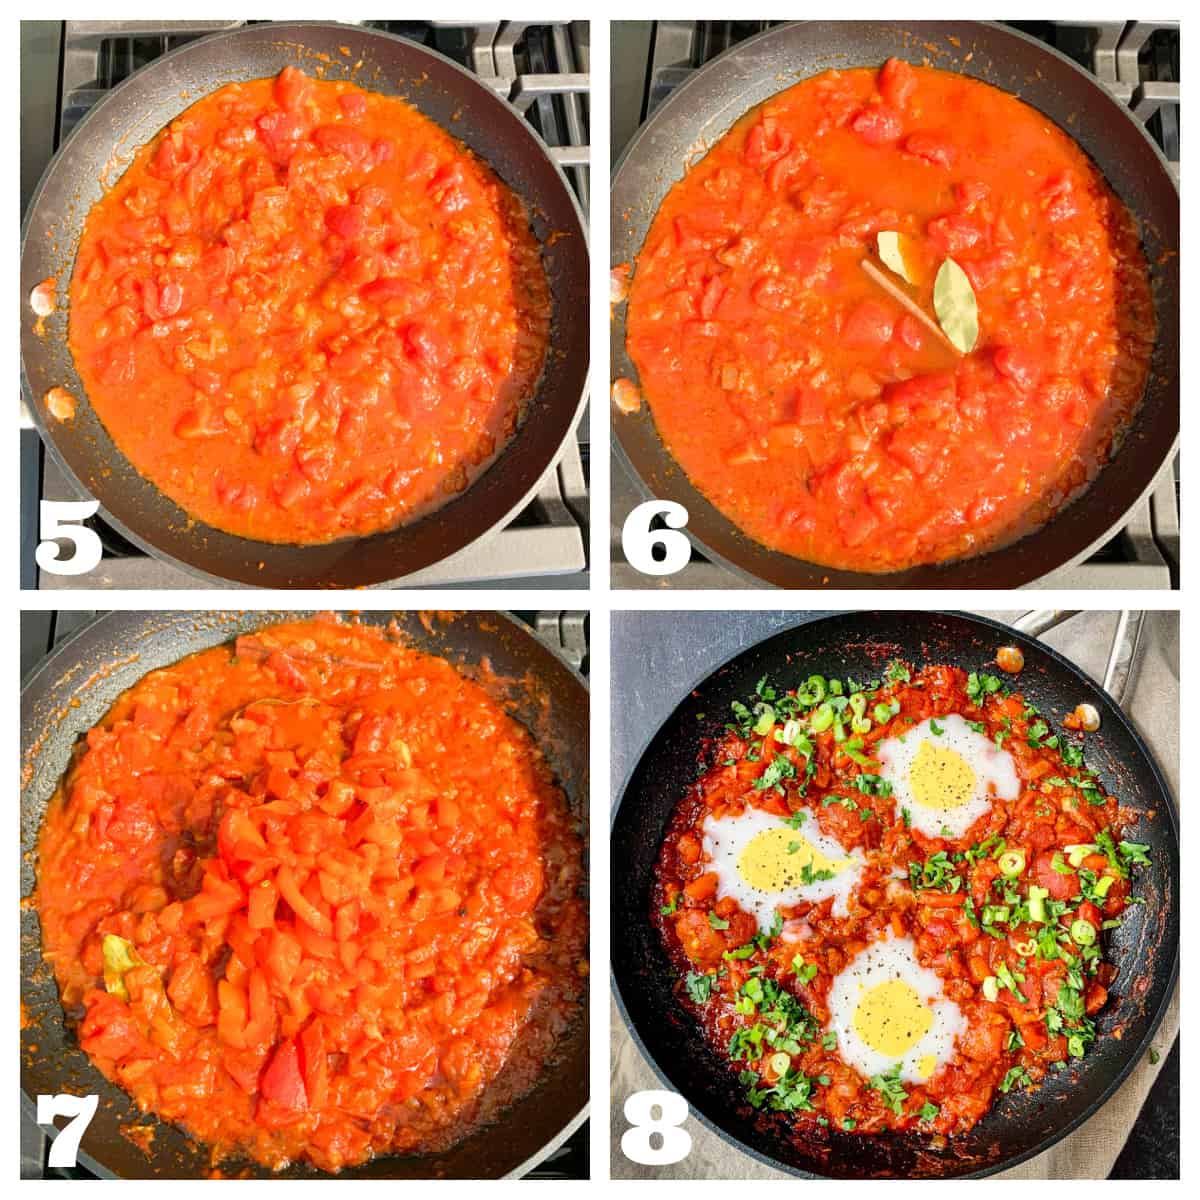 4 photo collage of adding tomatoes, bay leaves, cinnamon stick, diced peppers, and vegan eggs.